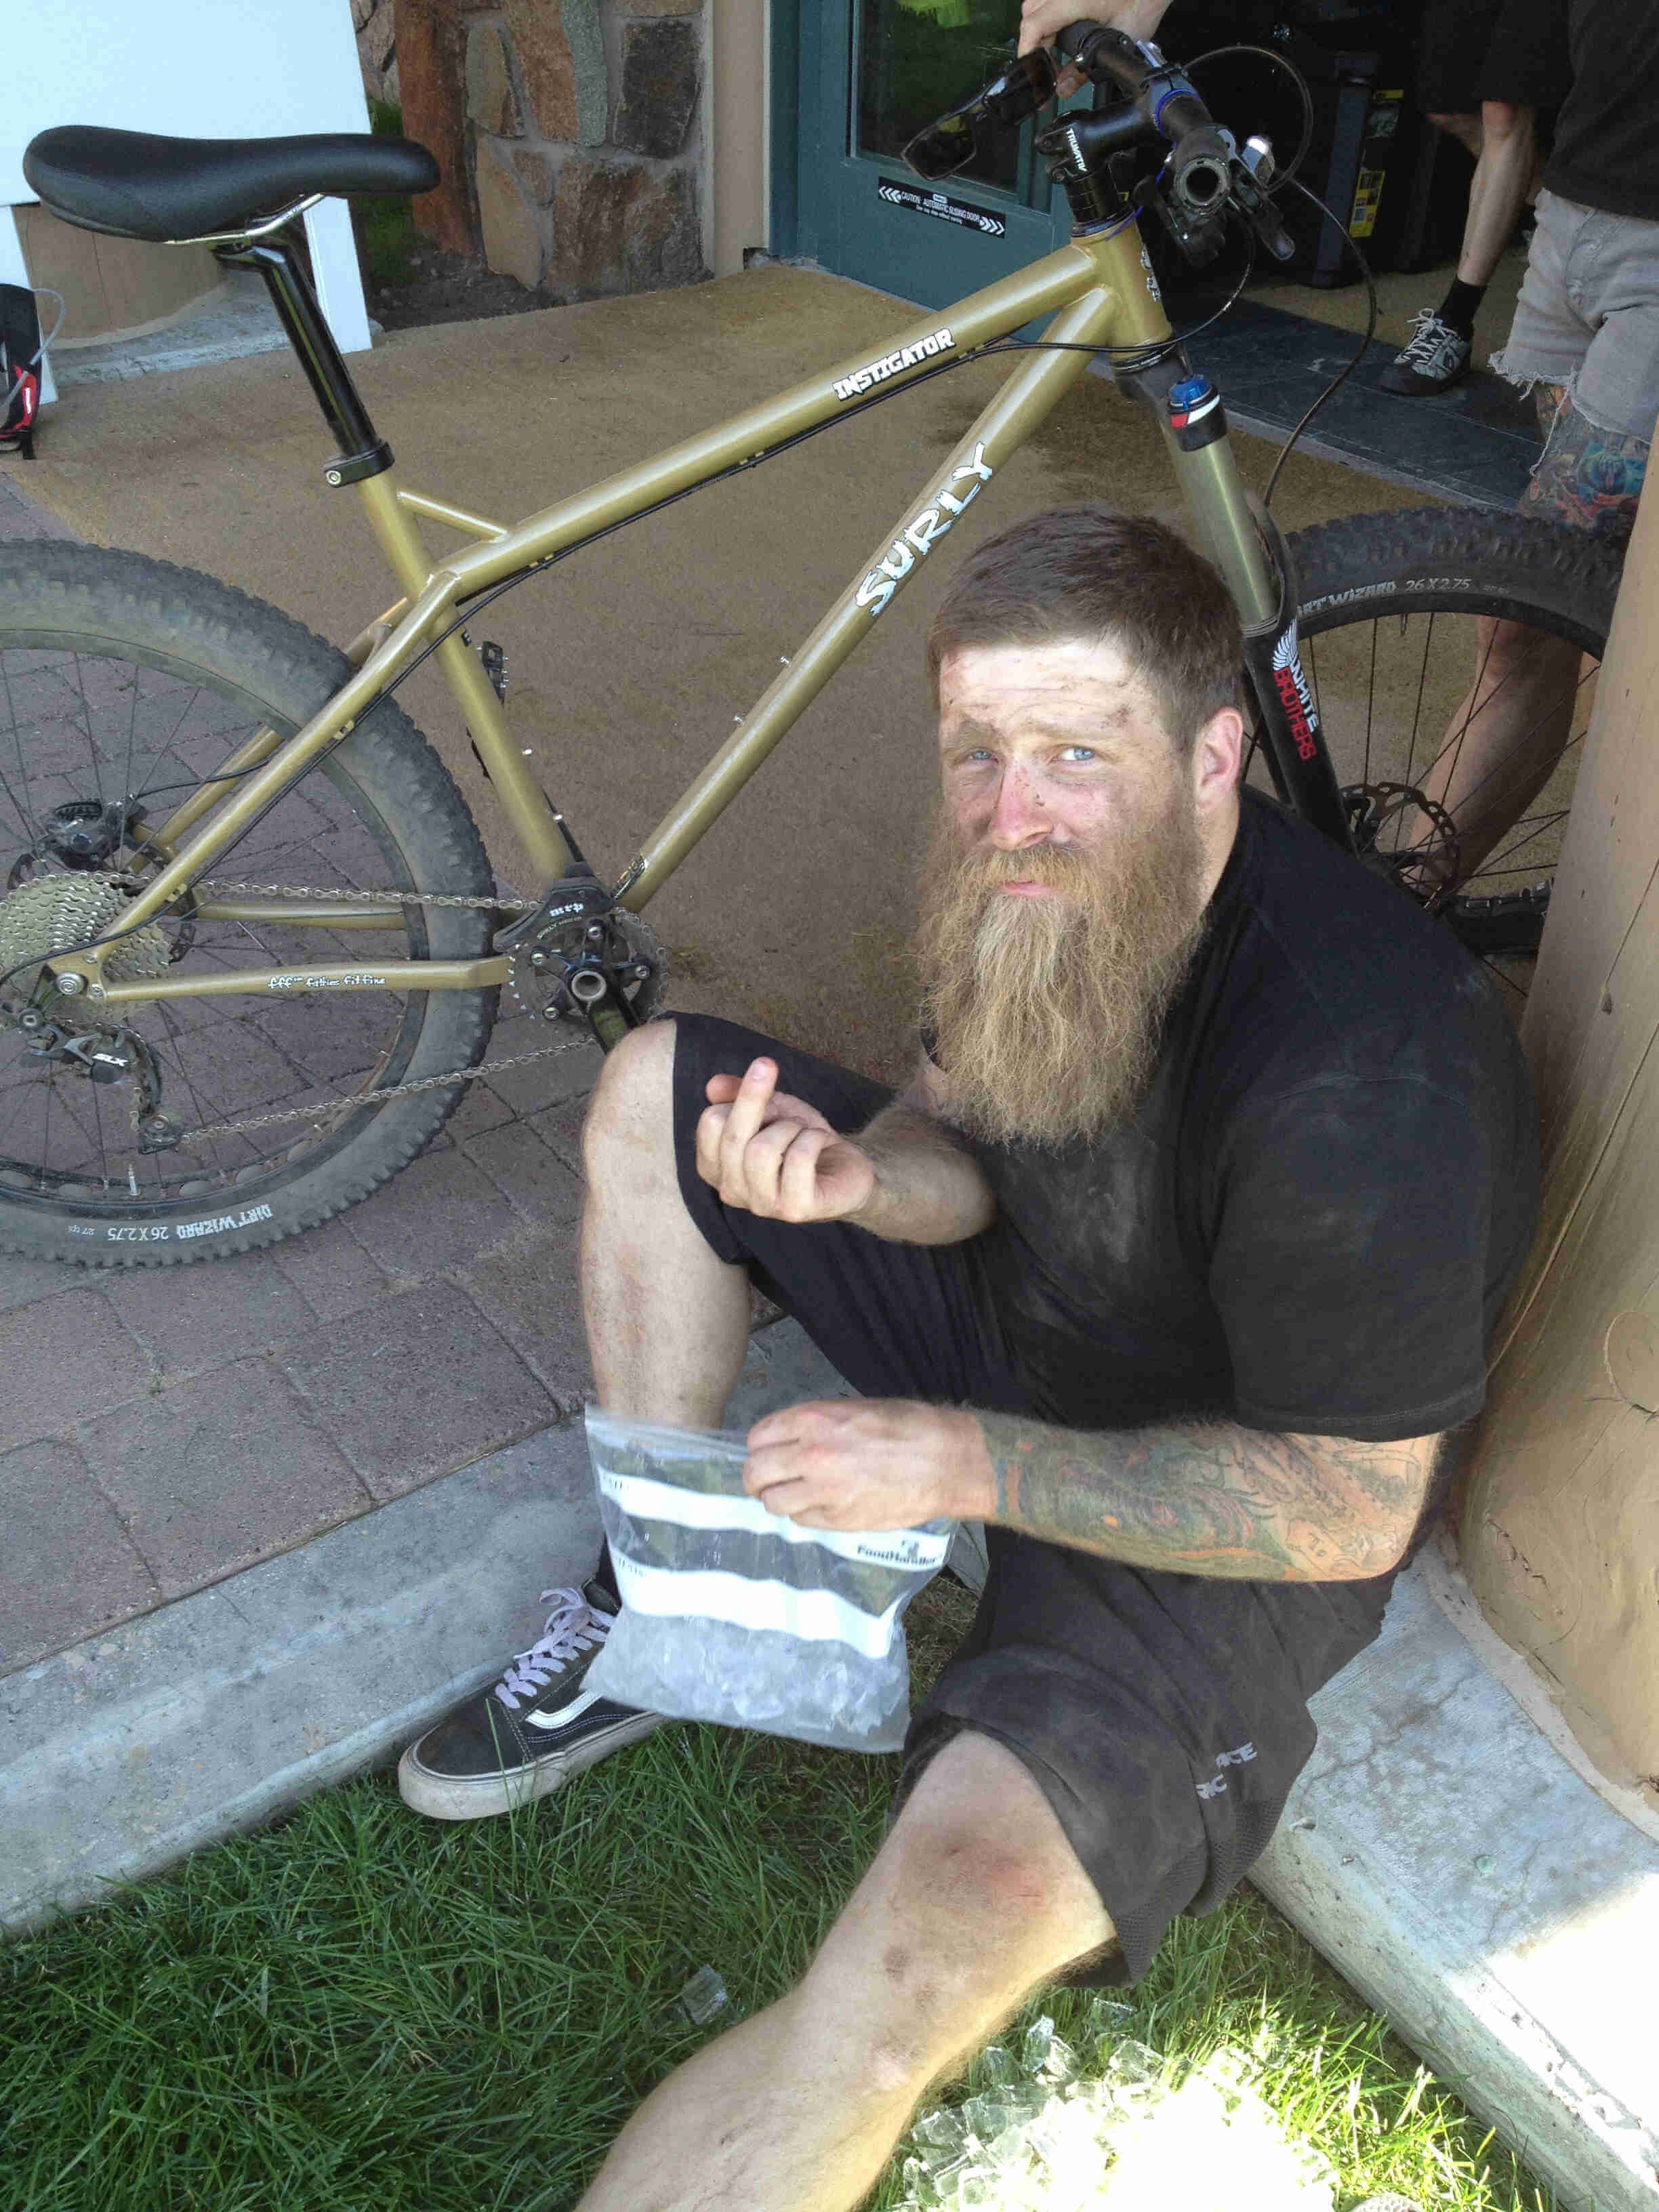 Downward view of a person, sitting in front of a Surly Instigator bike, icing their knee and showing their middle finger